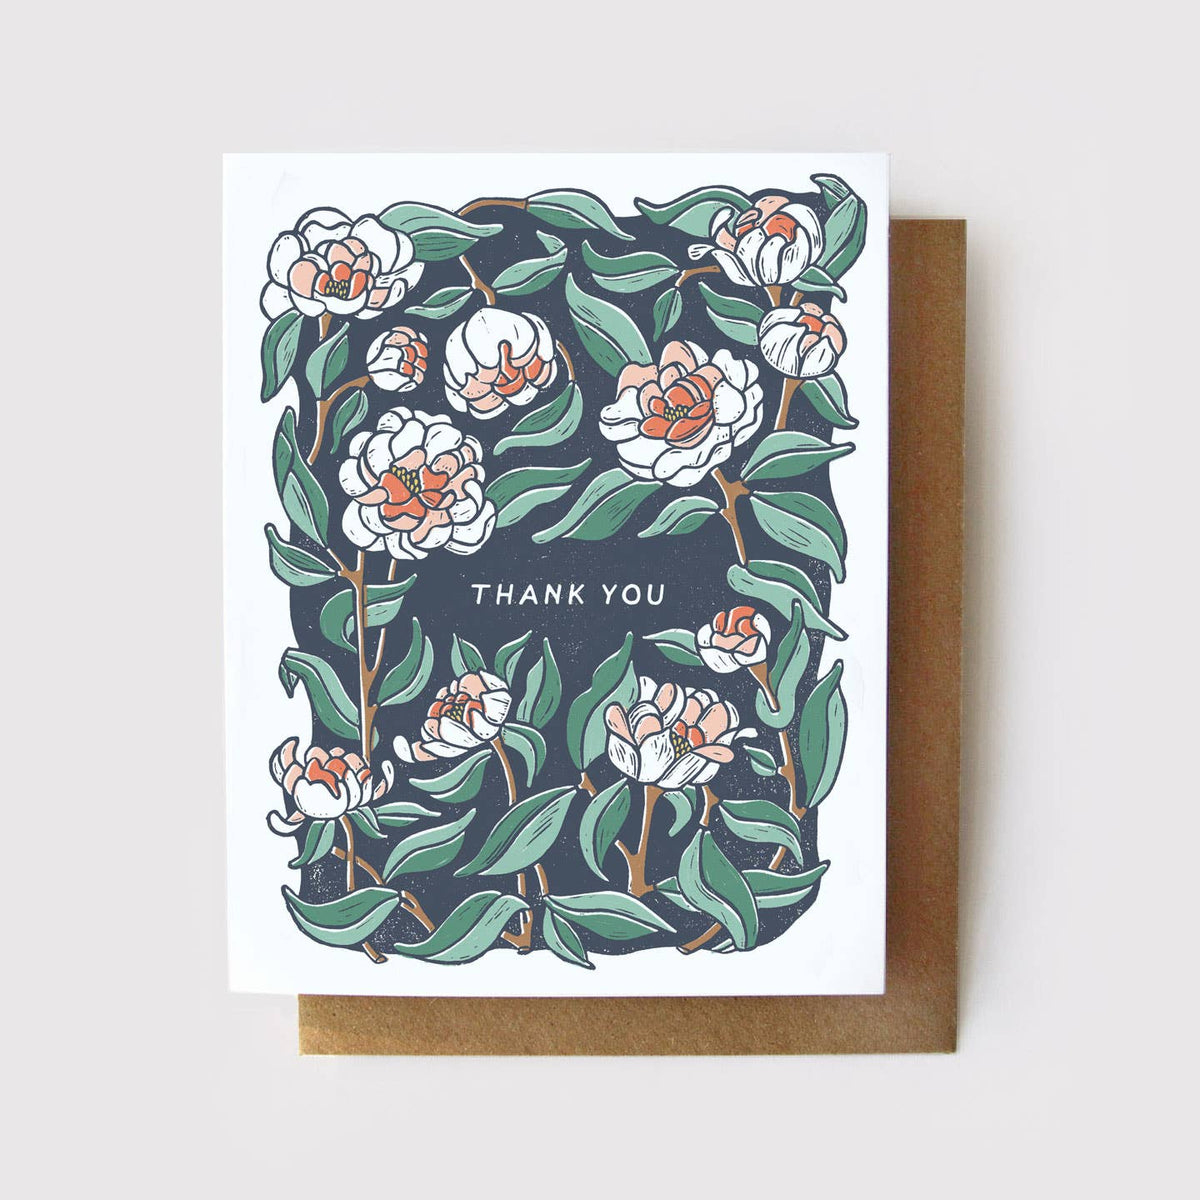 Thank You Card - Coral Charm Peony Plastic Free Card: Plastic-Free Branded Sticker